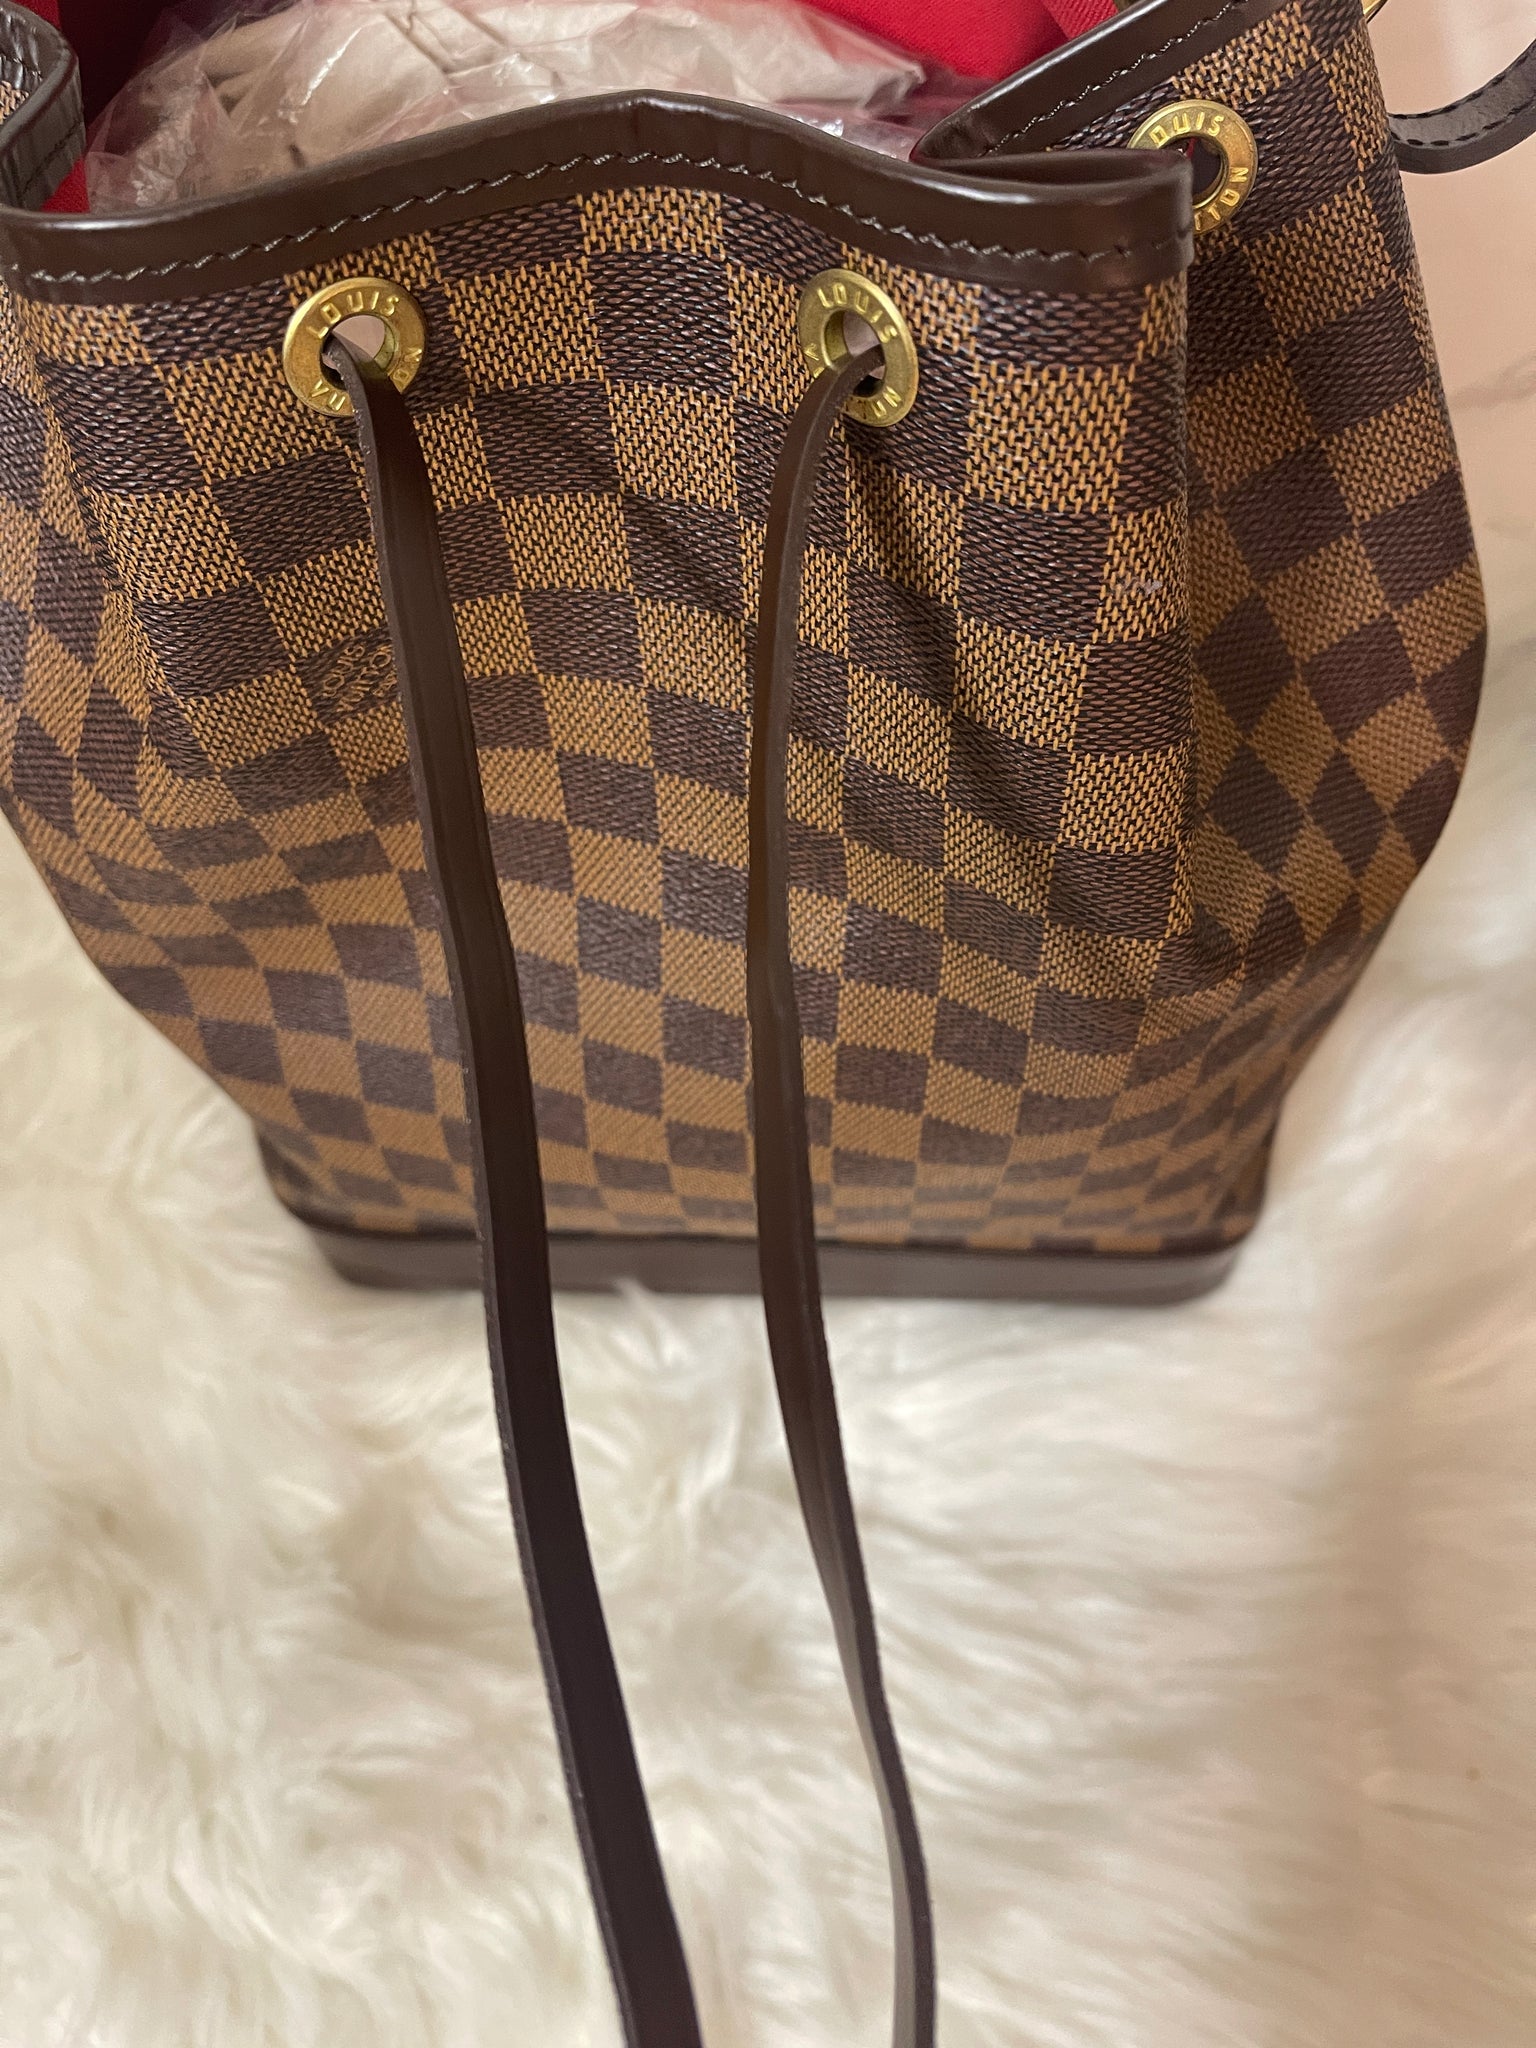 Transitioning to fall! This Louis Vuitton Noe GM is a timeless